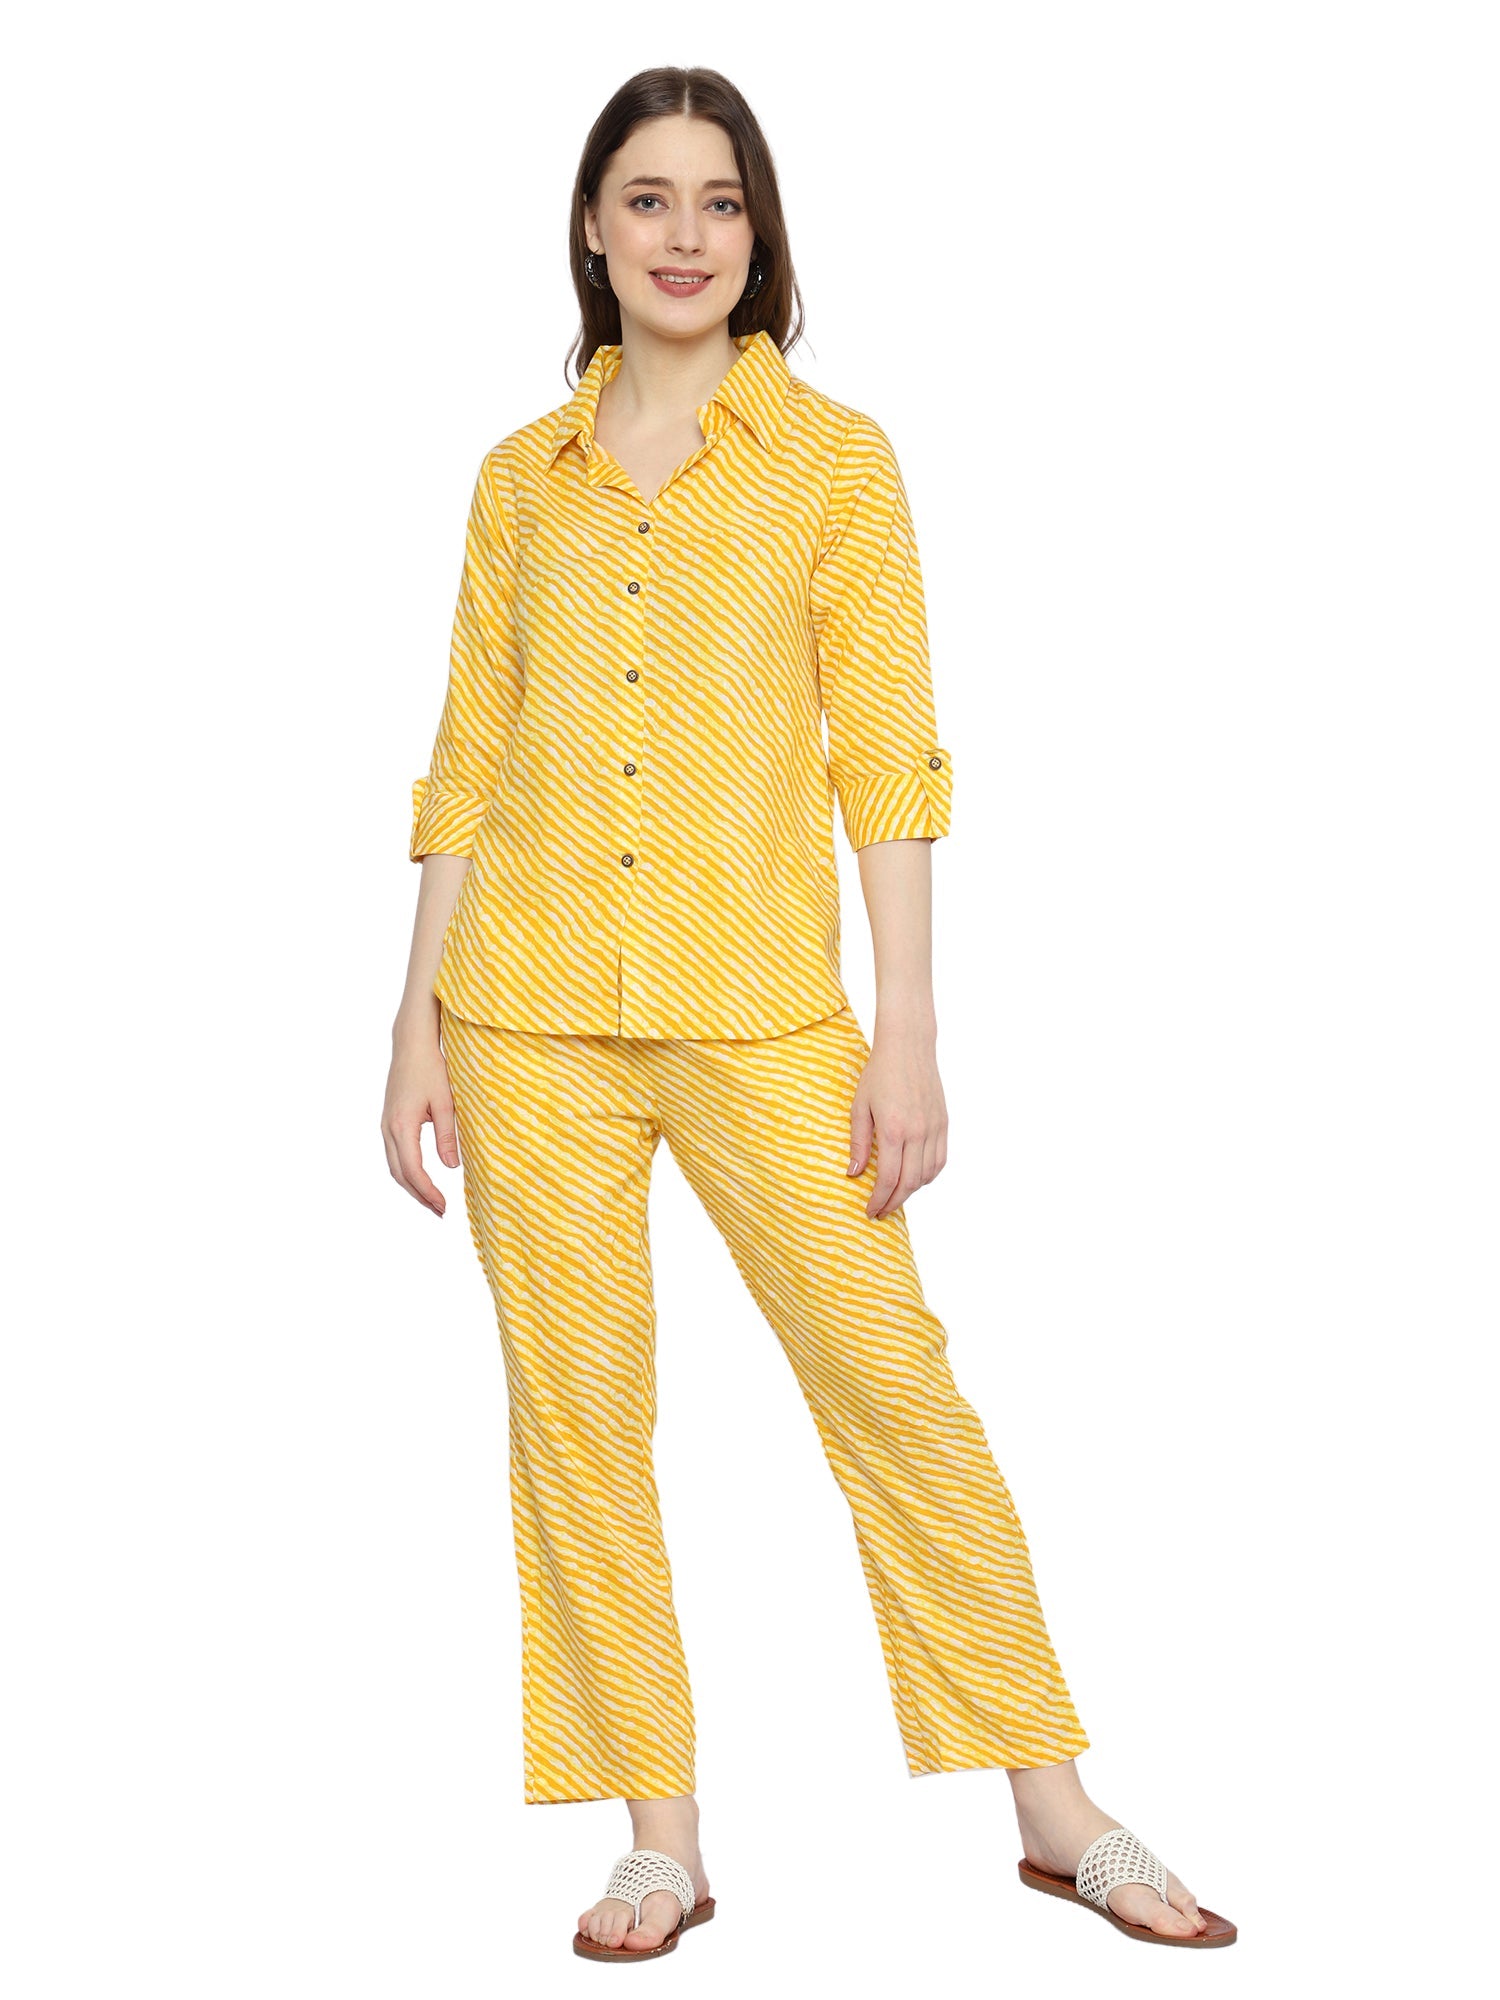 Vibrant Rayon Co-ord Set with Yellow Prints